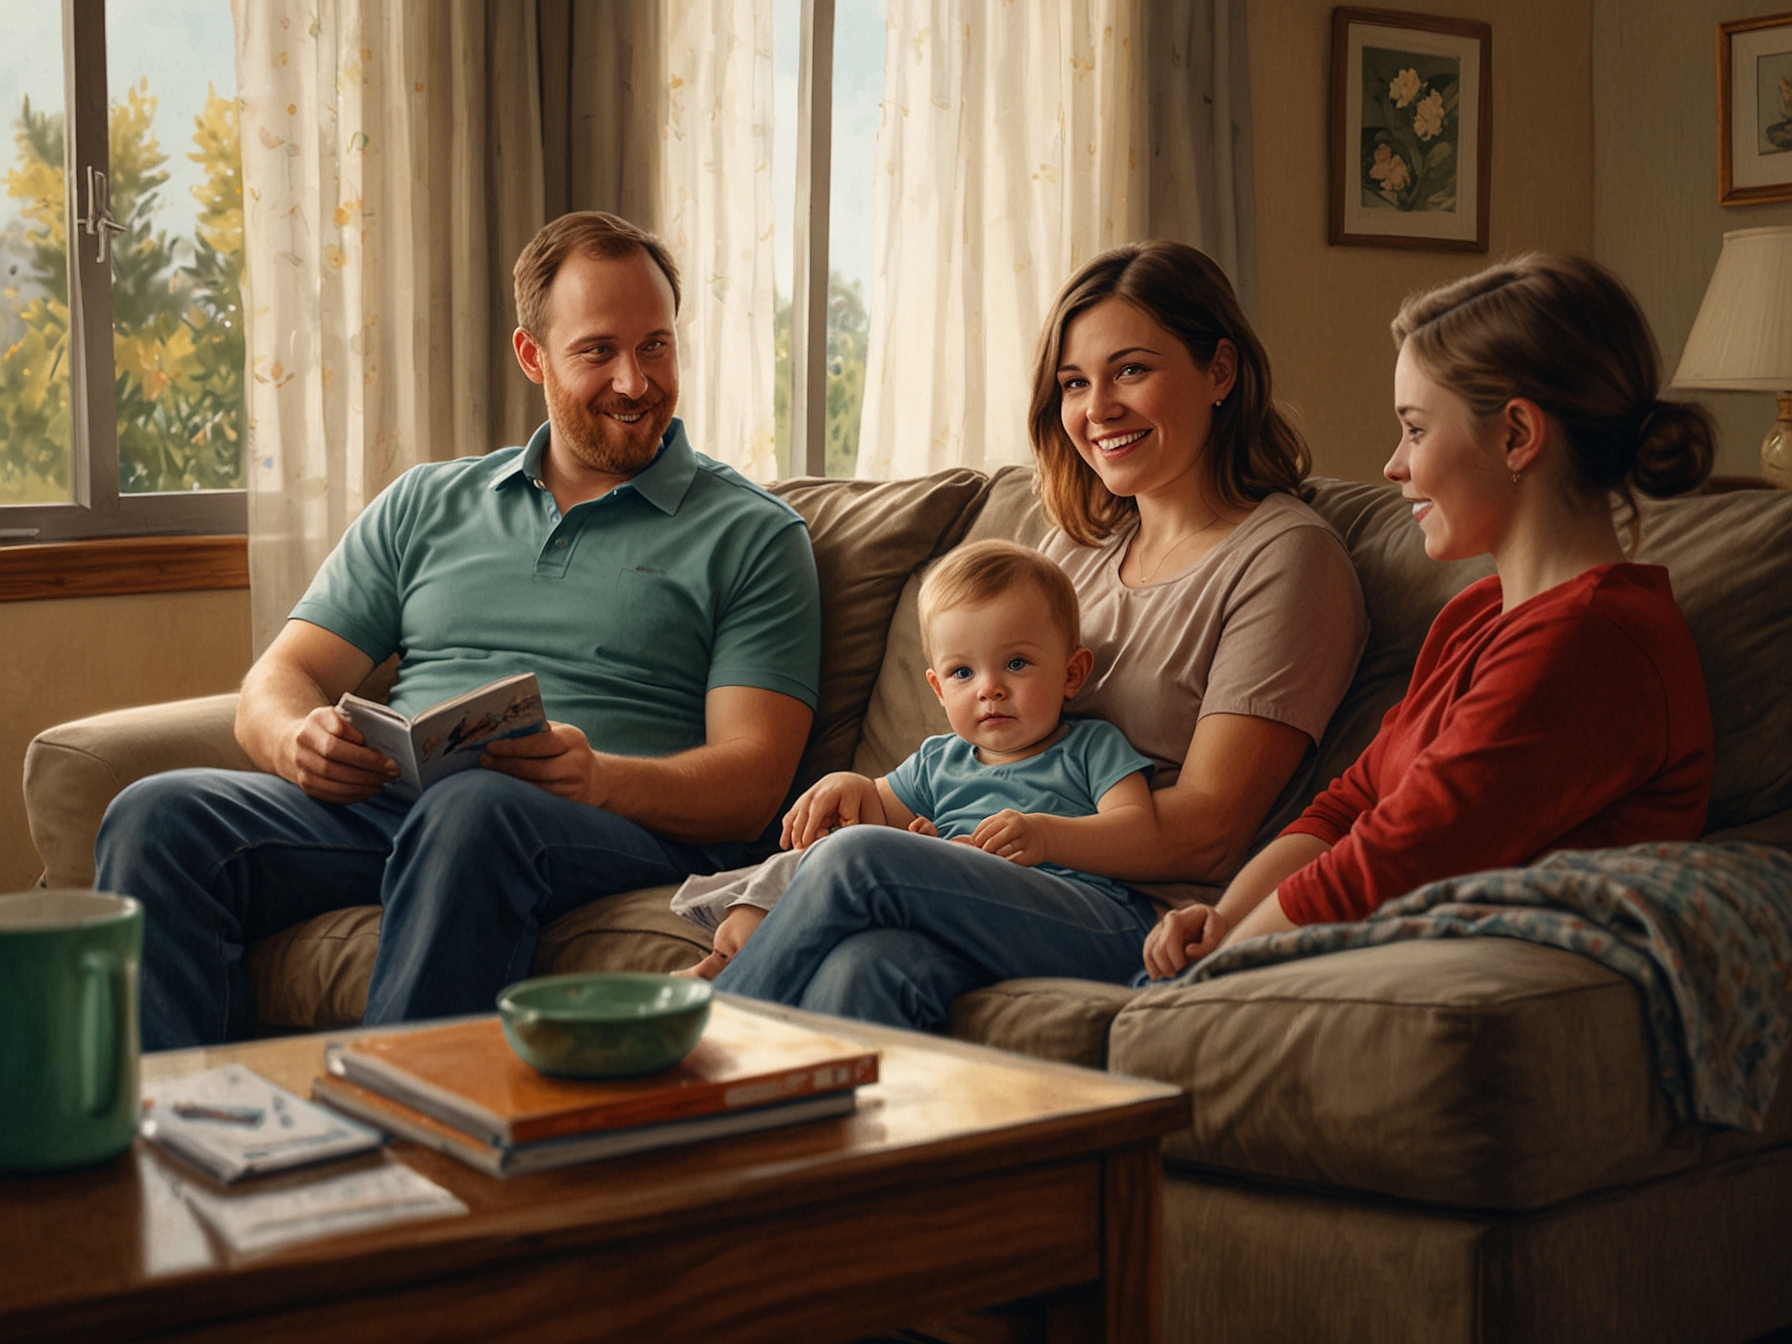 Adam Busby offers support to Danielle as they sit on a living room couch. Their quintuplets play in the background, capturing the essence of a busy yet loving family environment.